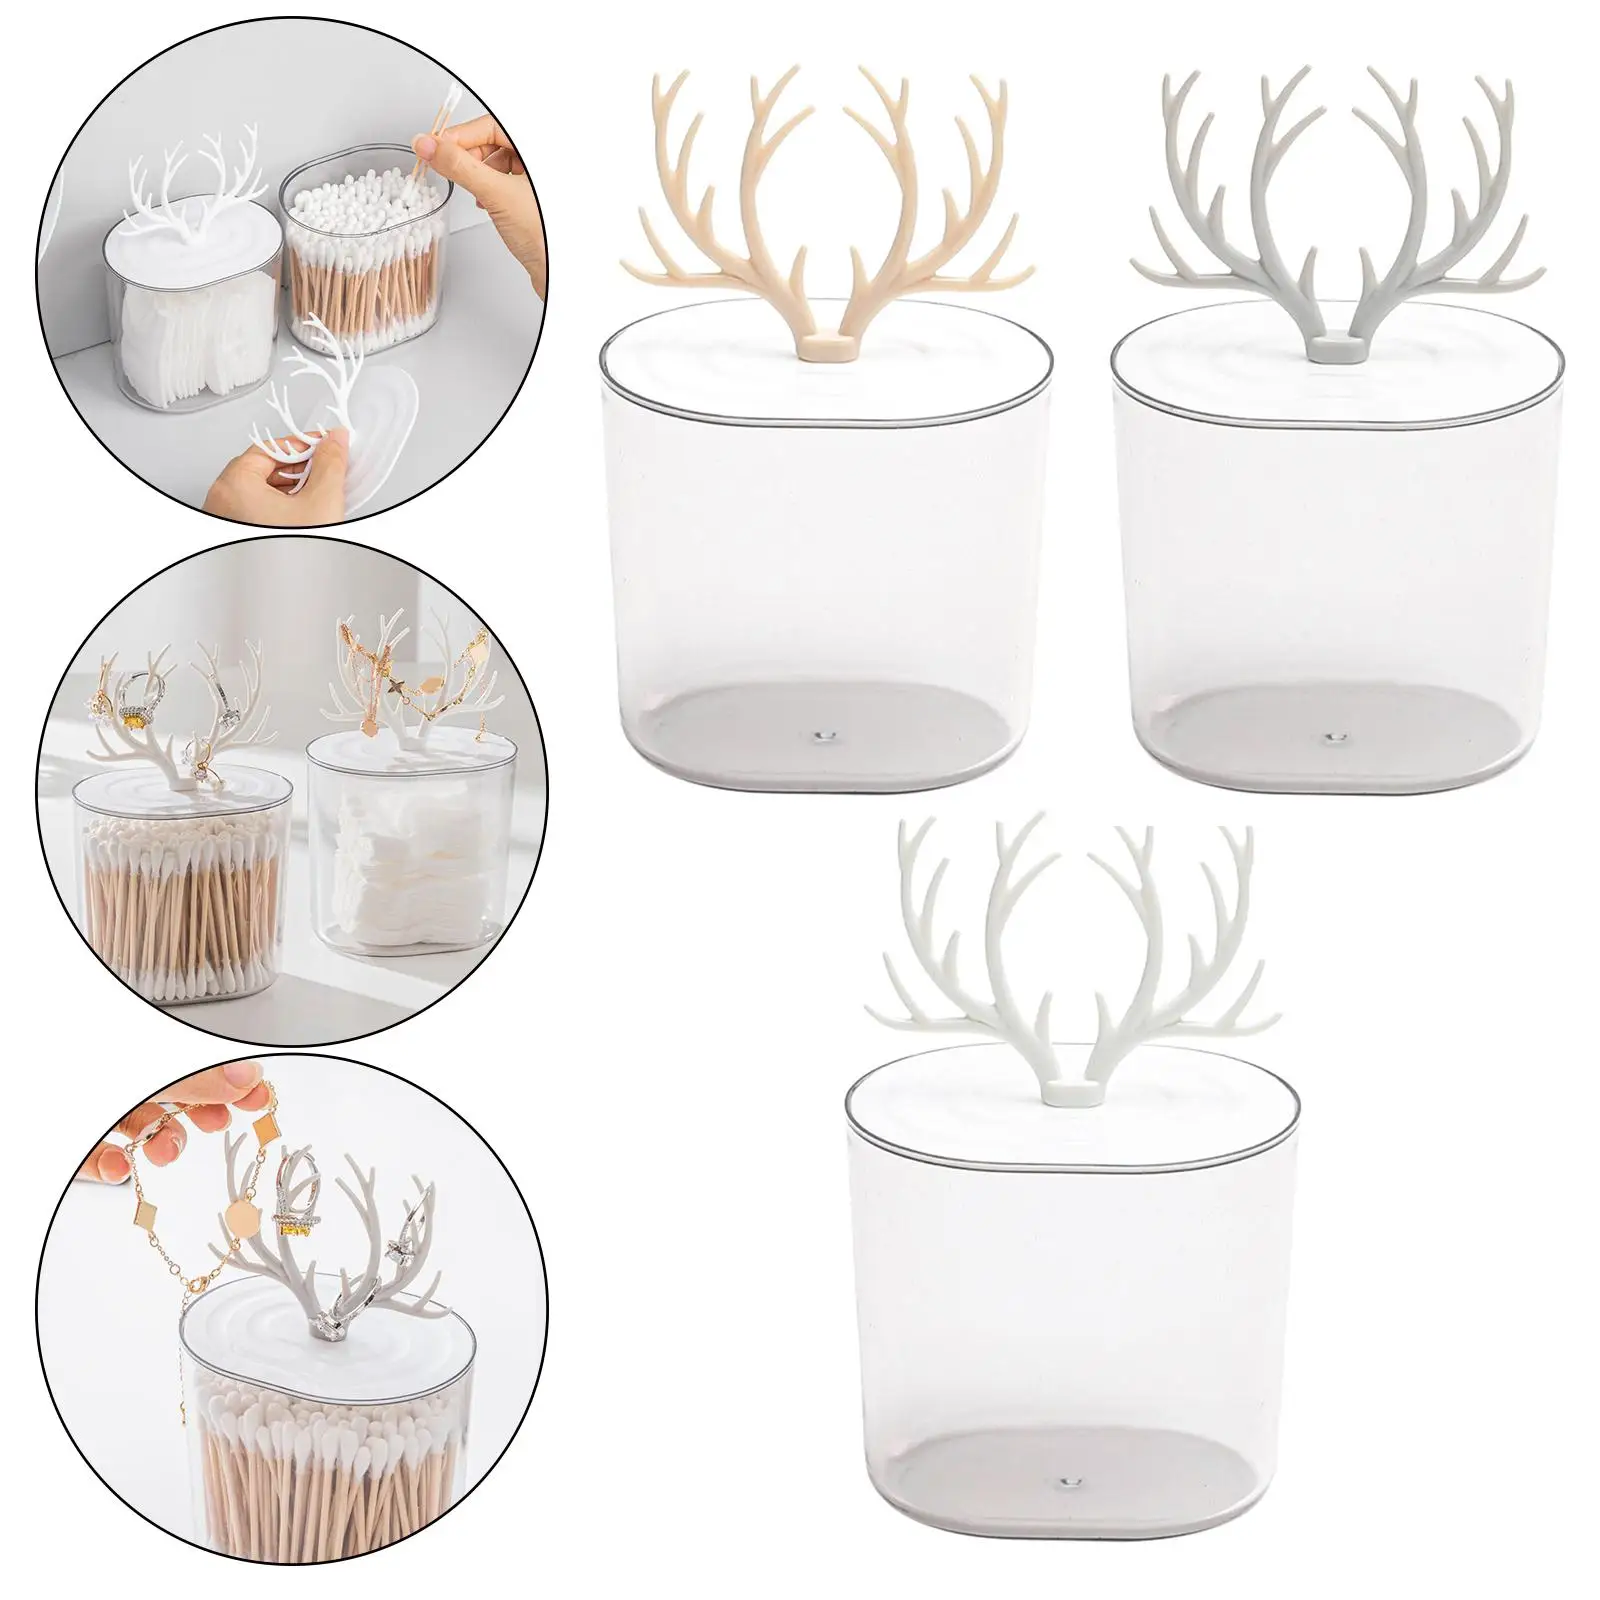 Cotton Swabs Holder with Lid with Antler Shape Hook Plastic Apothecary Jar Canister Container for Countertop Bathroom Bedroom